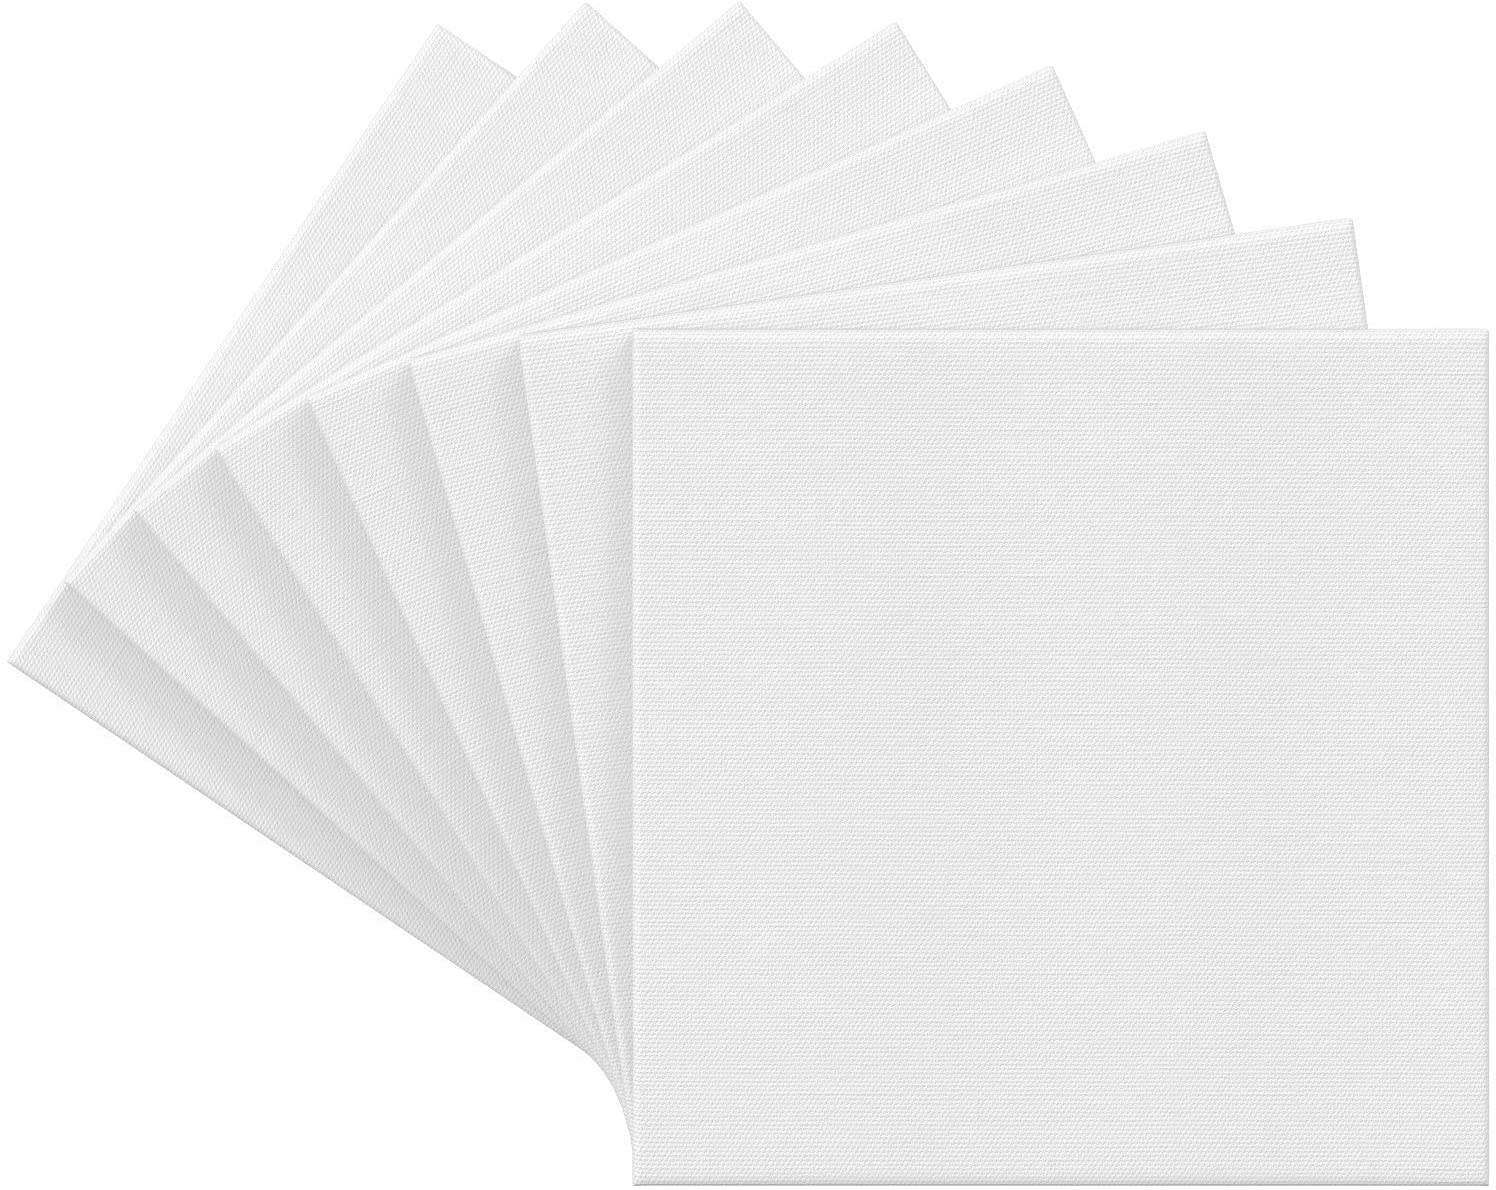 Premium Stretched Canvas, 18 x 24 - Pack of 4